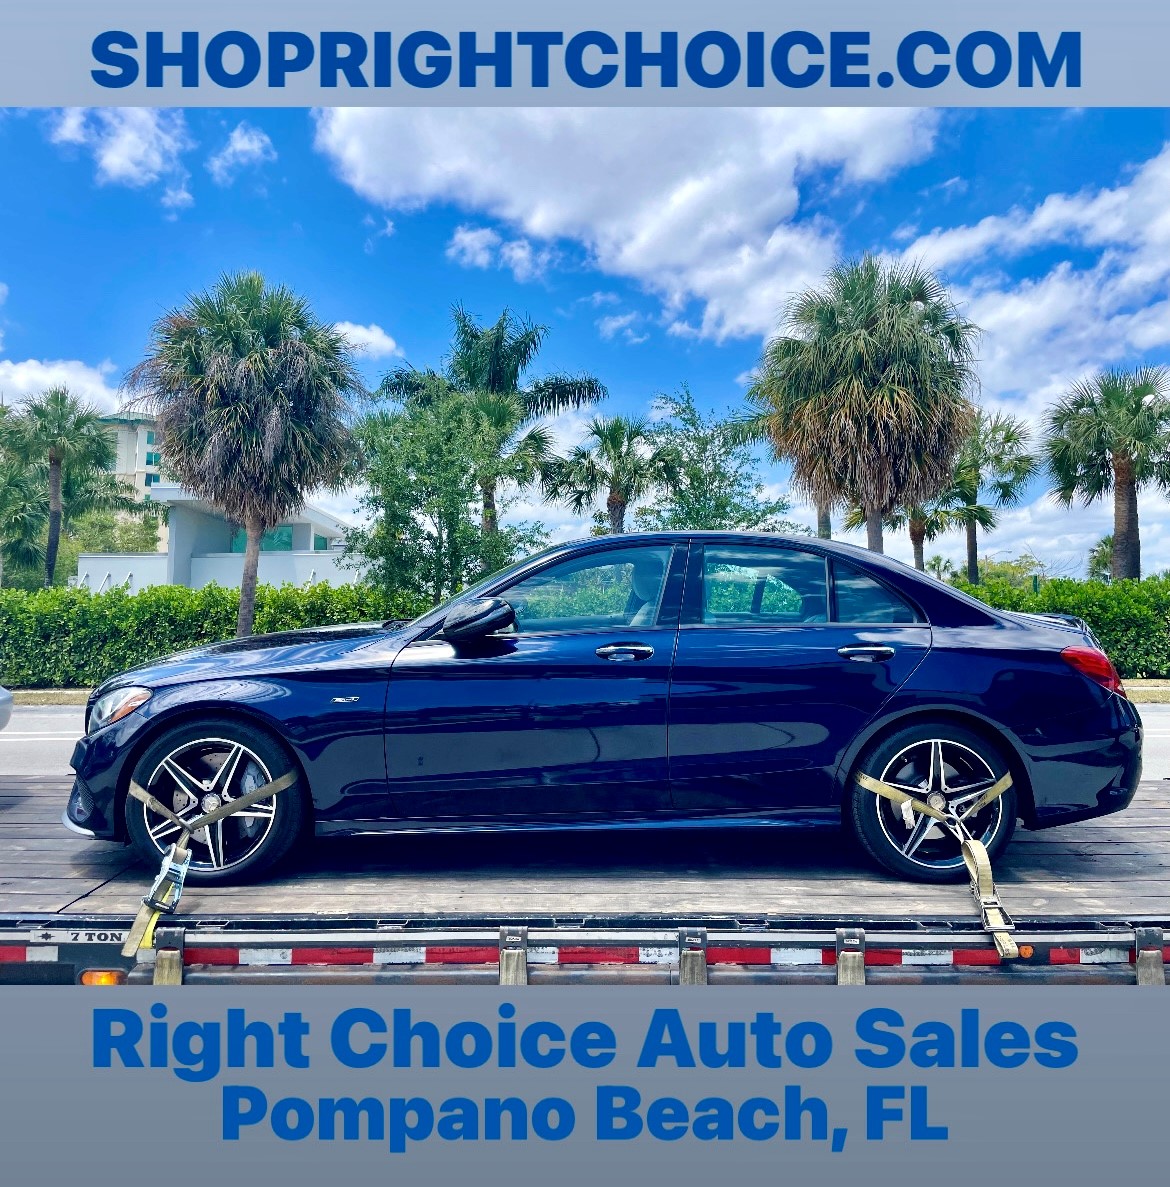 2016 Mercedes-Benz C450 AMG on its way to its new owner in South Carolina! #RightChoiceAutoSales in Pompano Beach, FL delivers the best used car deals to your home! #Mercedes #AMG #cardelivery #usedcardealer